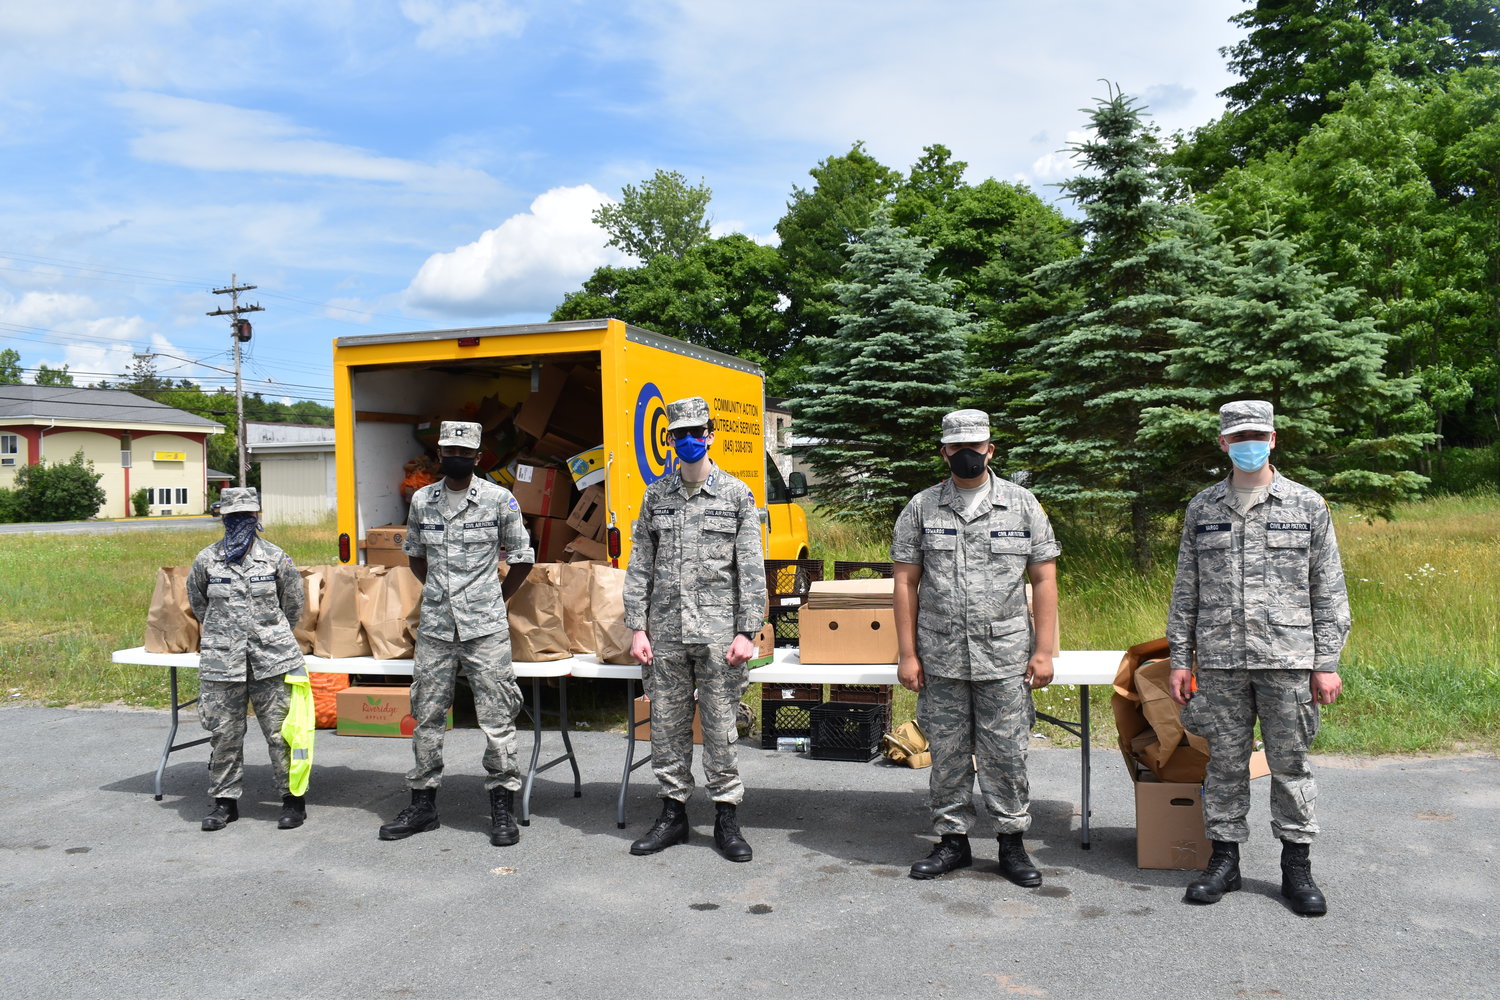 Civil Air Patrol Cadets worked with Action Toward Independence of Monticello and Ulster County Community Action Committee to help distribute food to those in need.